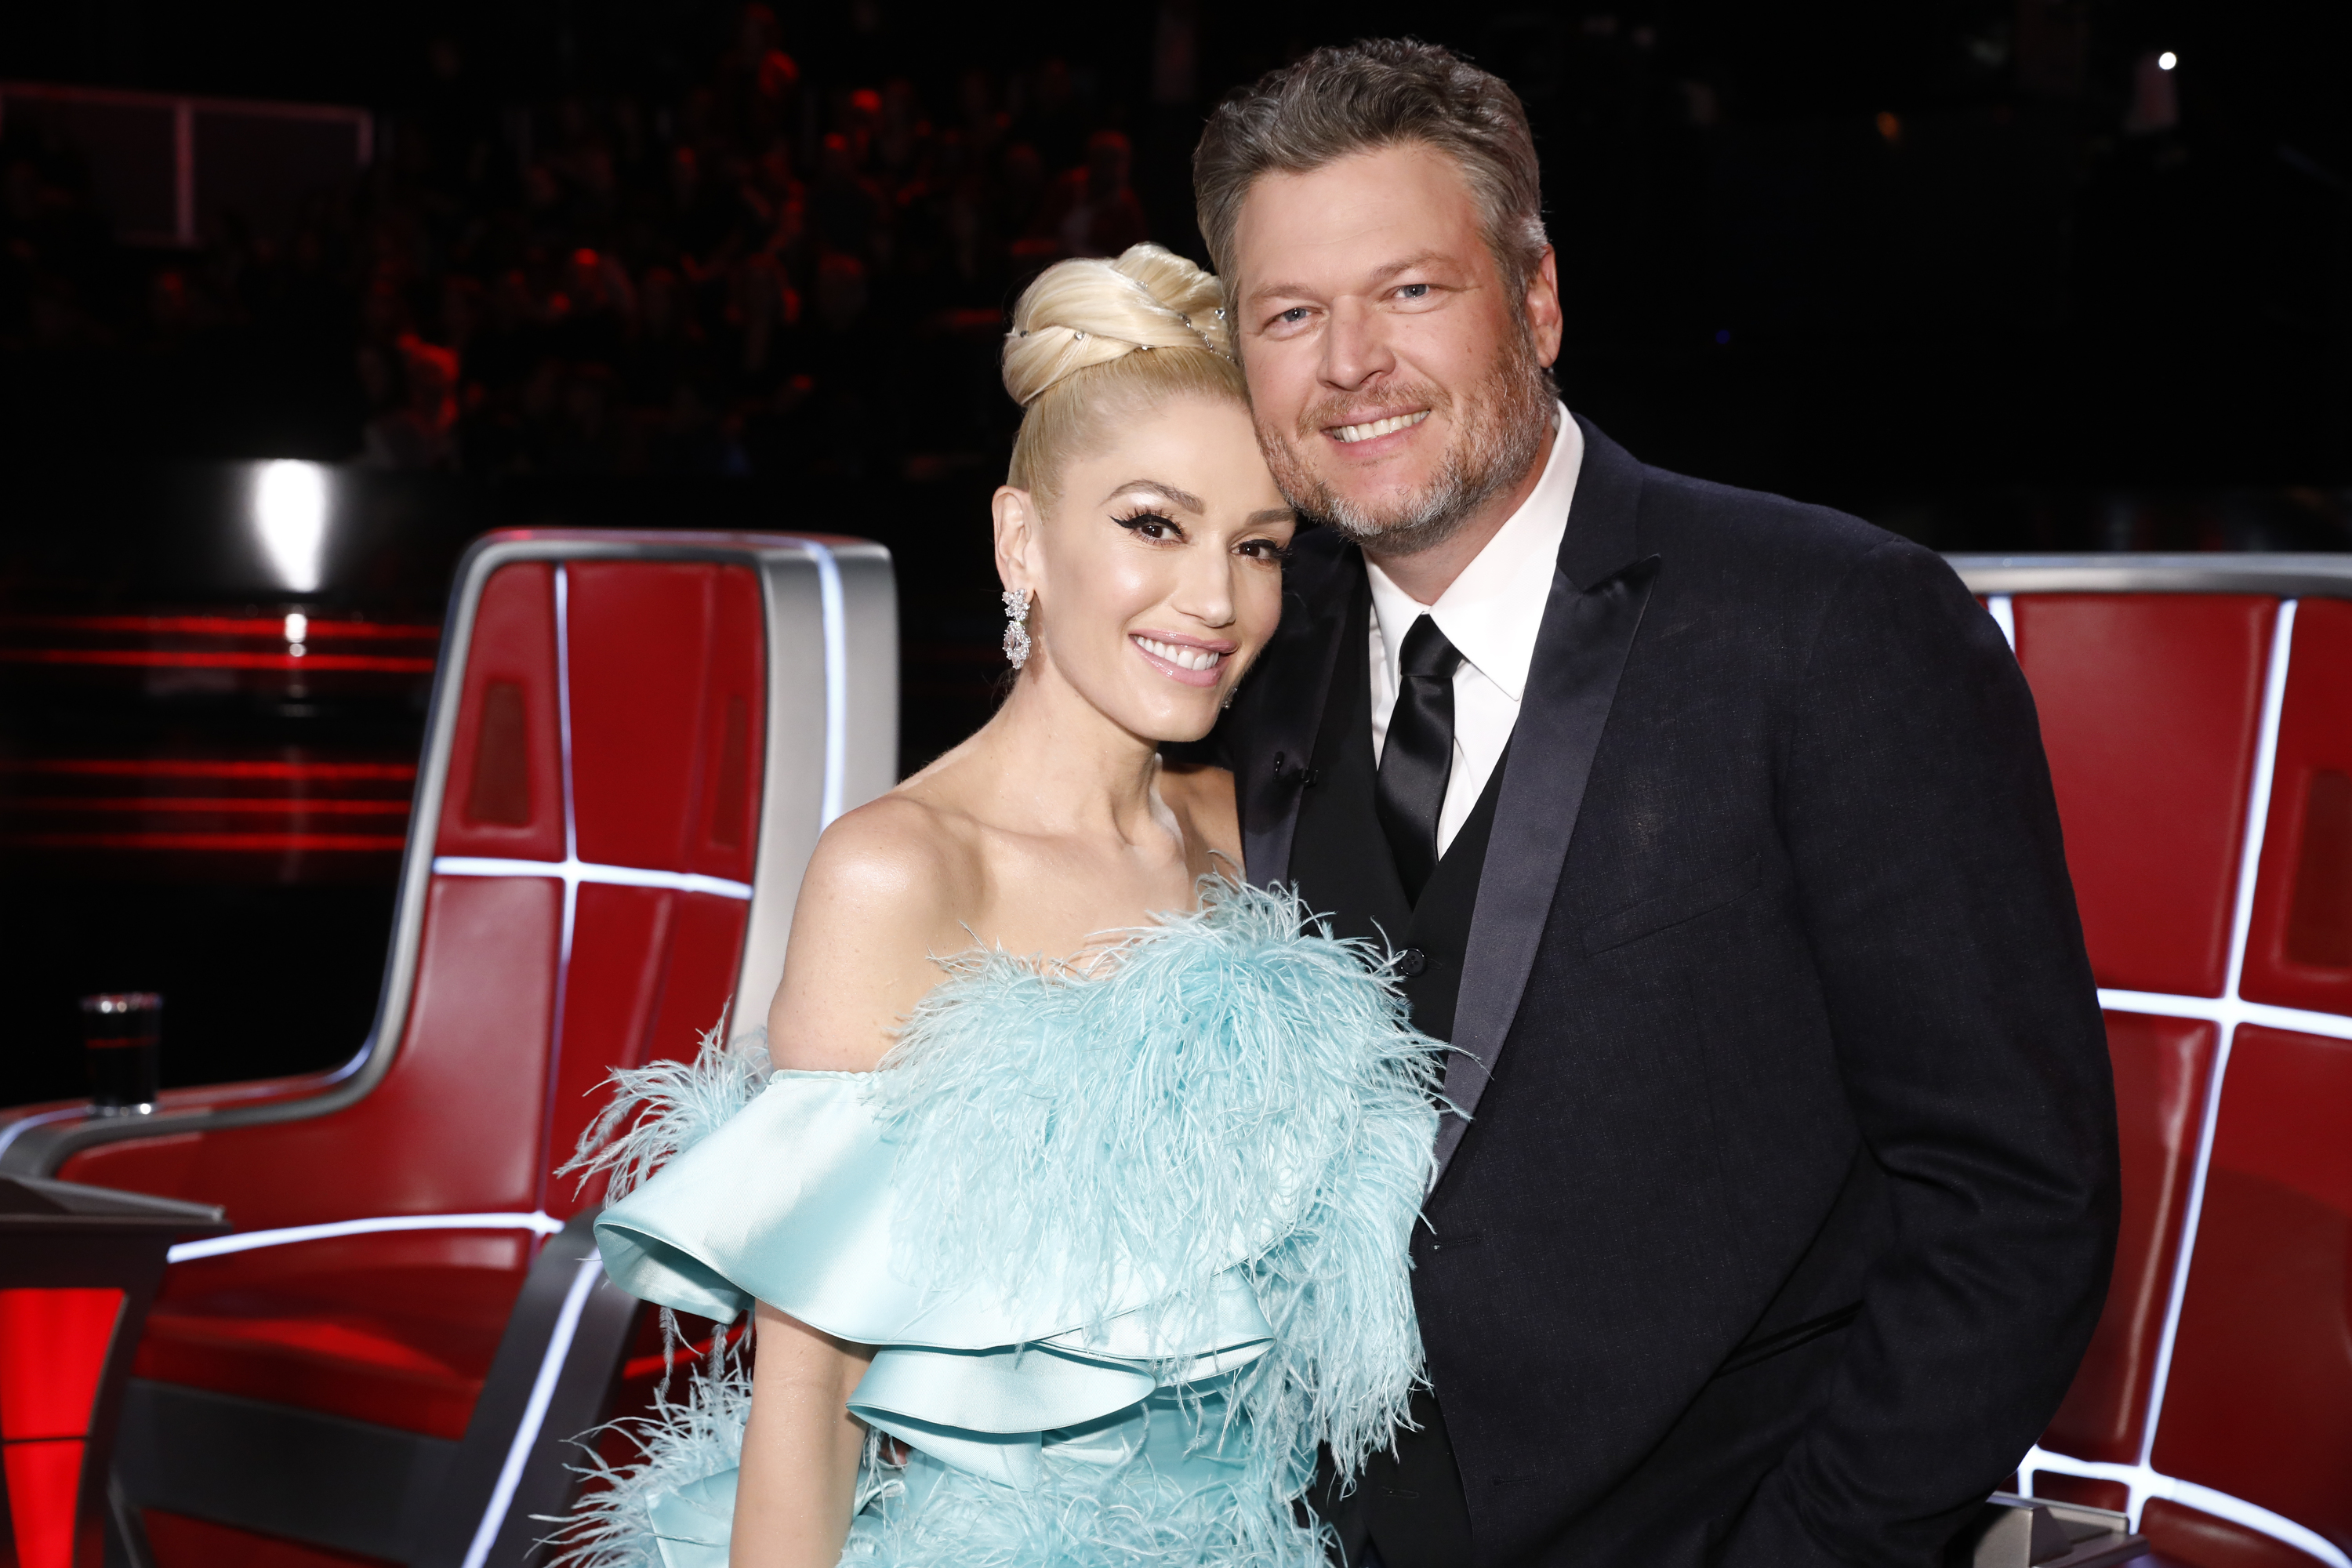 Blake Shelton and Gwen Stefani on "The Voice" in 2019 | Source: Getty Images